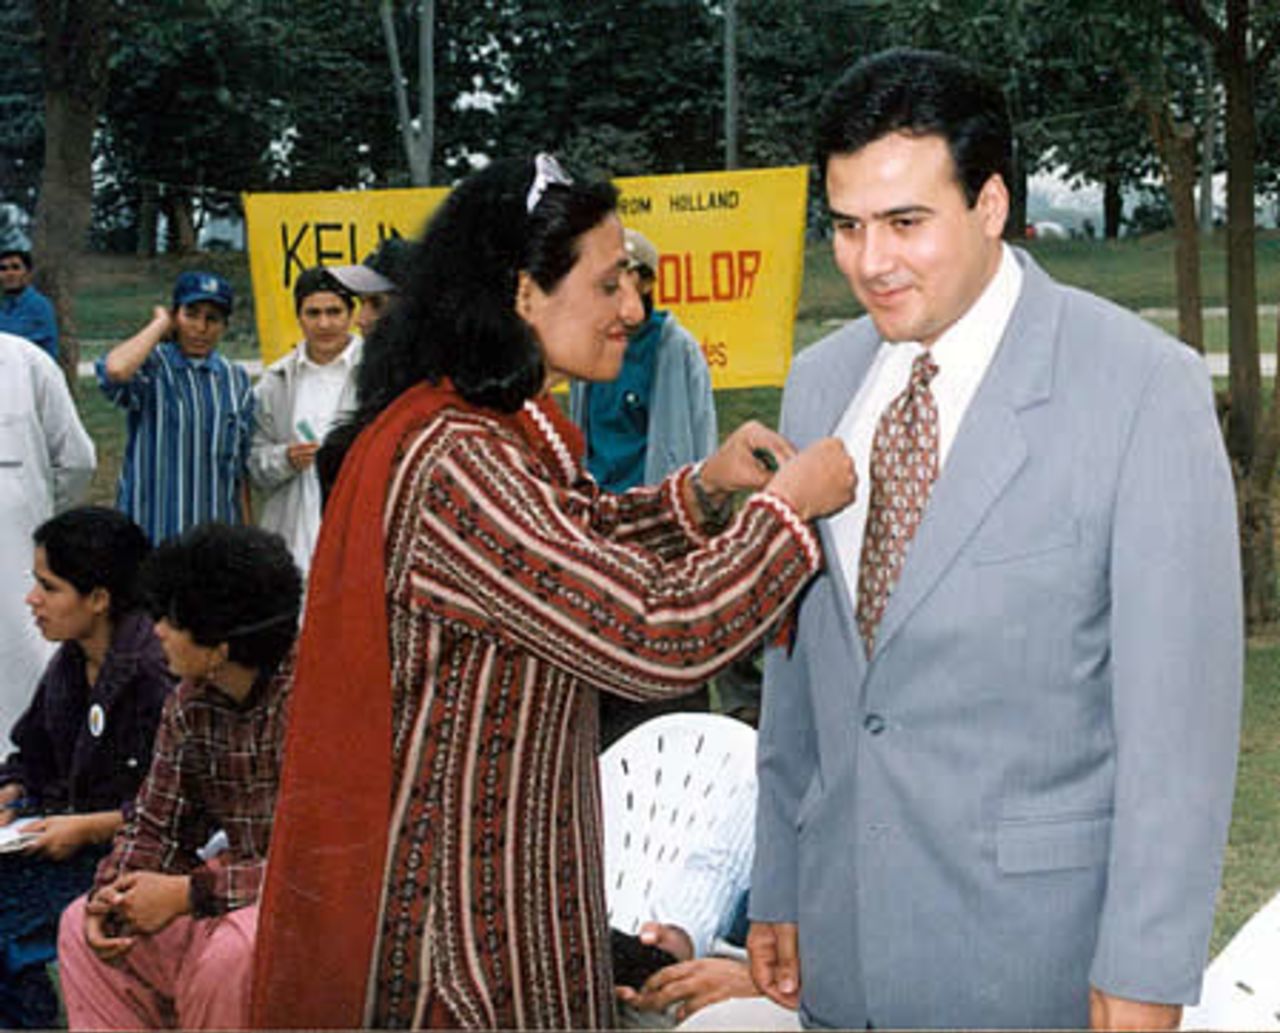 PWCA Secretary Azraa Parveen welcoming Chief Guest Zahid Bashir of PCB, NQWCT-2000, 20-25 Nov 2000, Race Course Park, Lahore